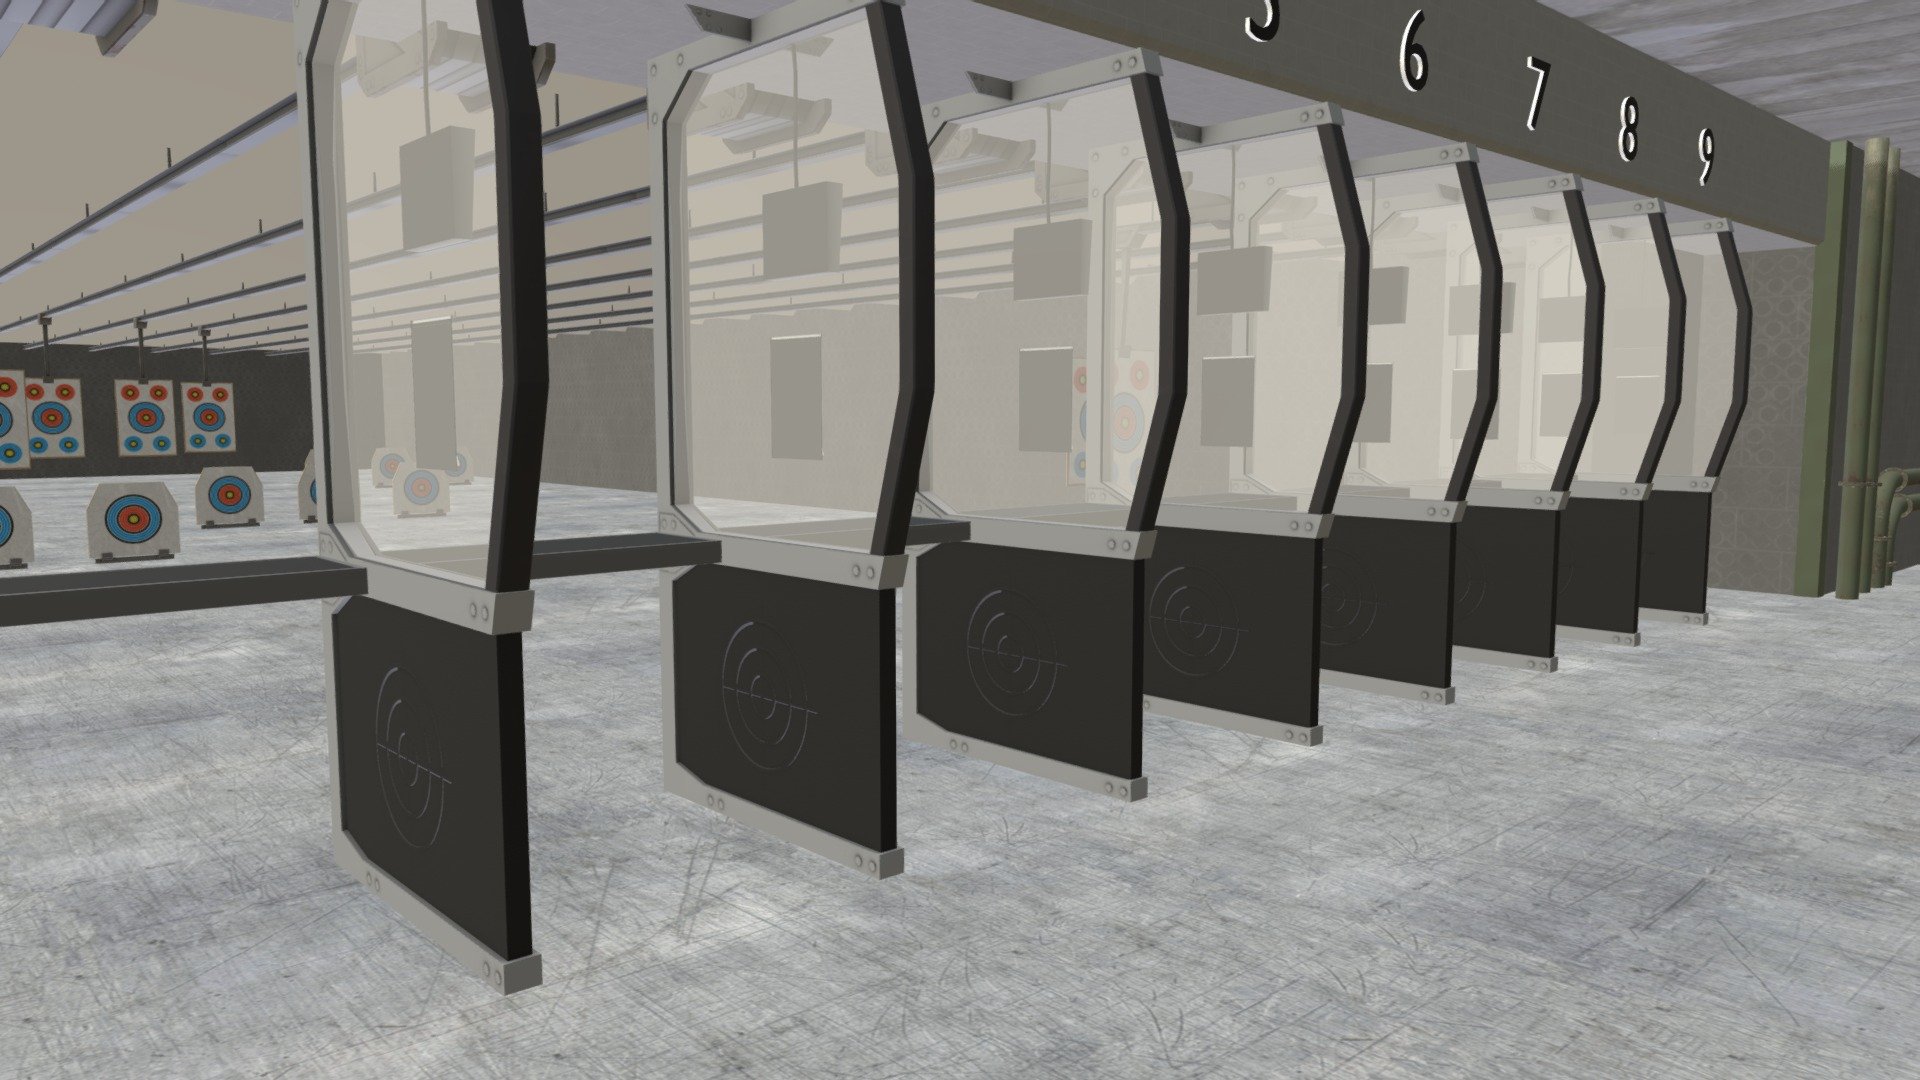 If you want add for your shooting game training arena, this pack for you! Several kinds of targets and props.

Pack includes:
- interior
- targets
- barriers
- lamps
- piping
- cupboards
- door

PBR materials - Shooting Range - Buy Royalty Free 3D model by Mixall (@Mixaills) 3d model